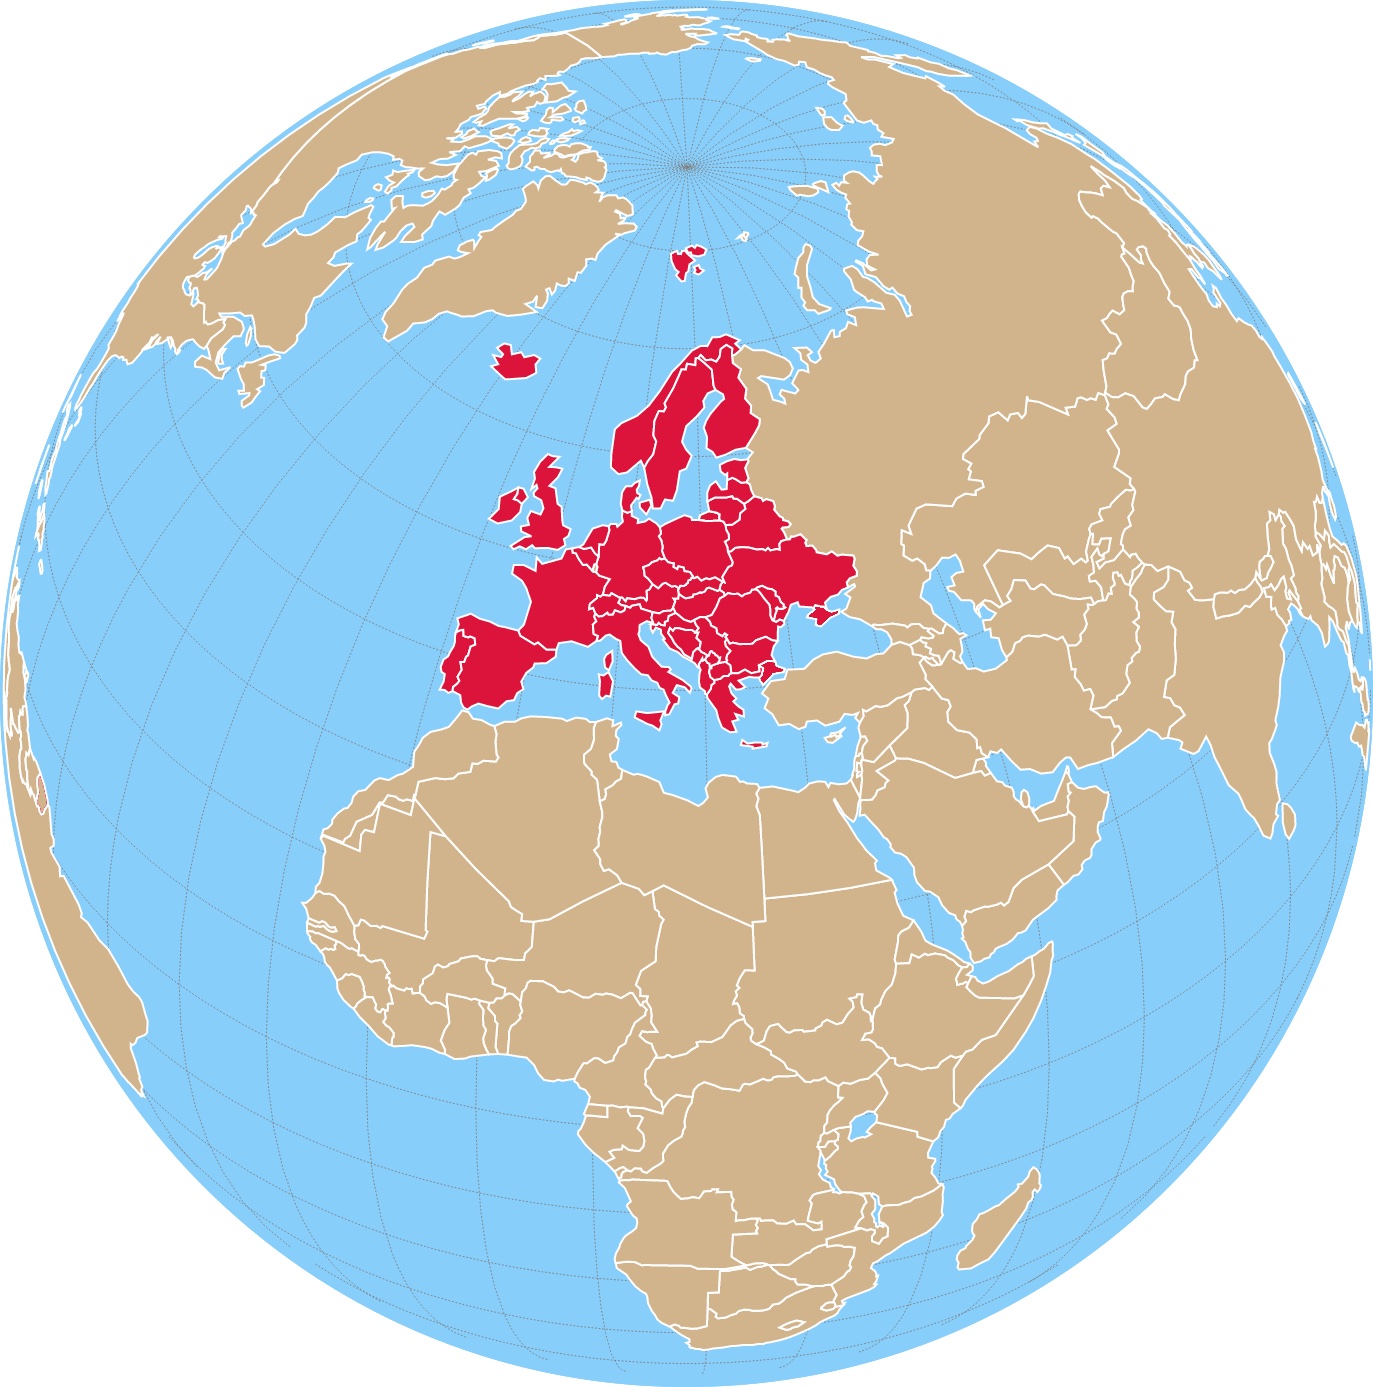 Europe location on a map